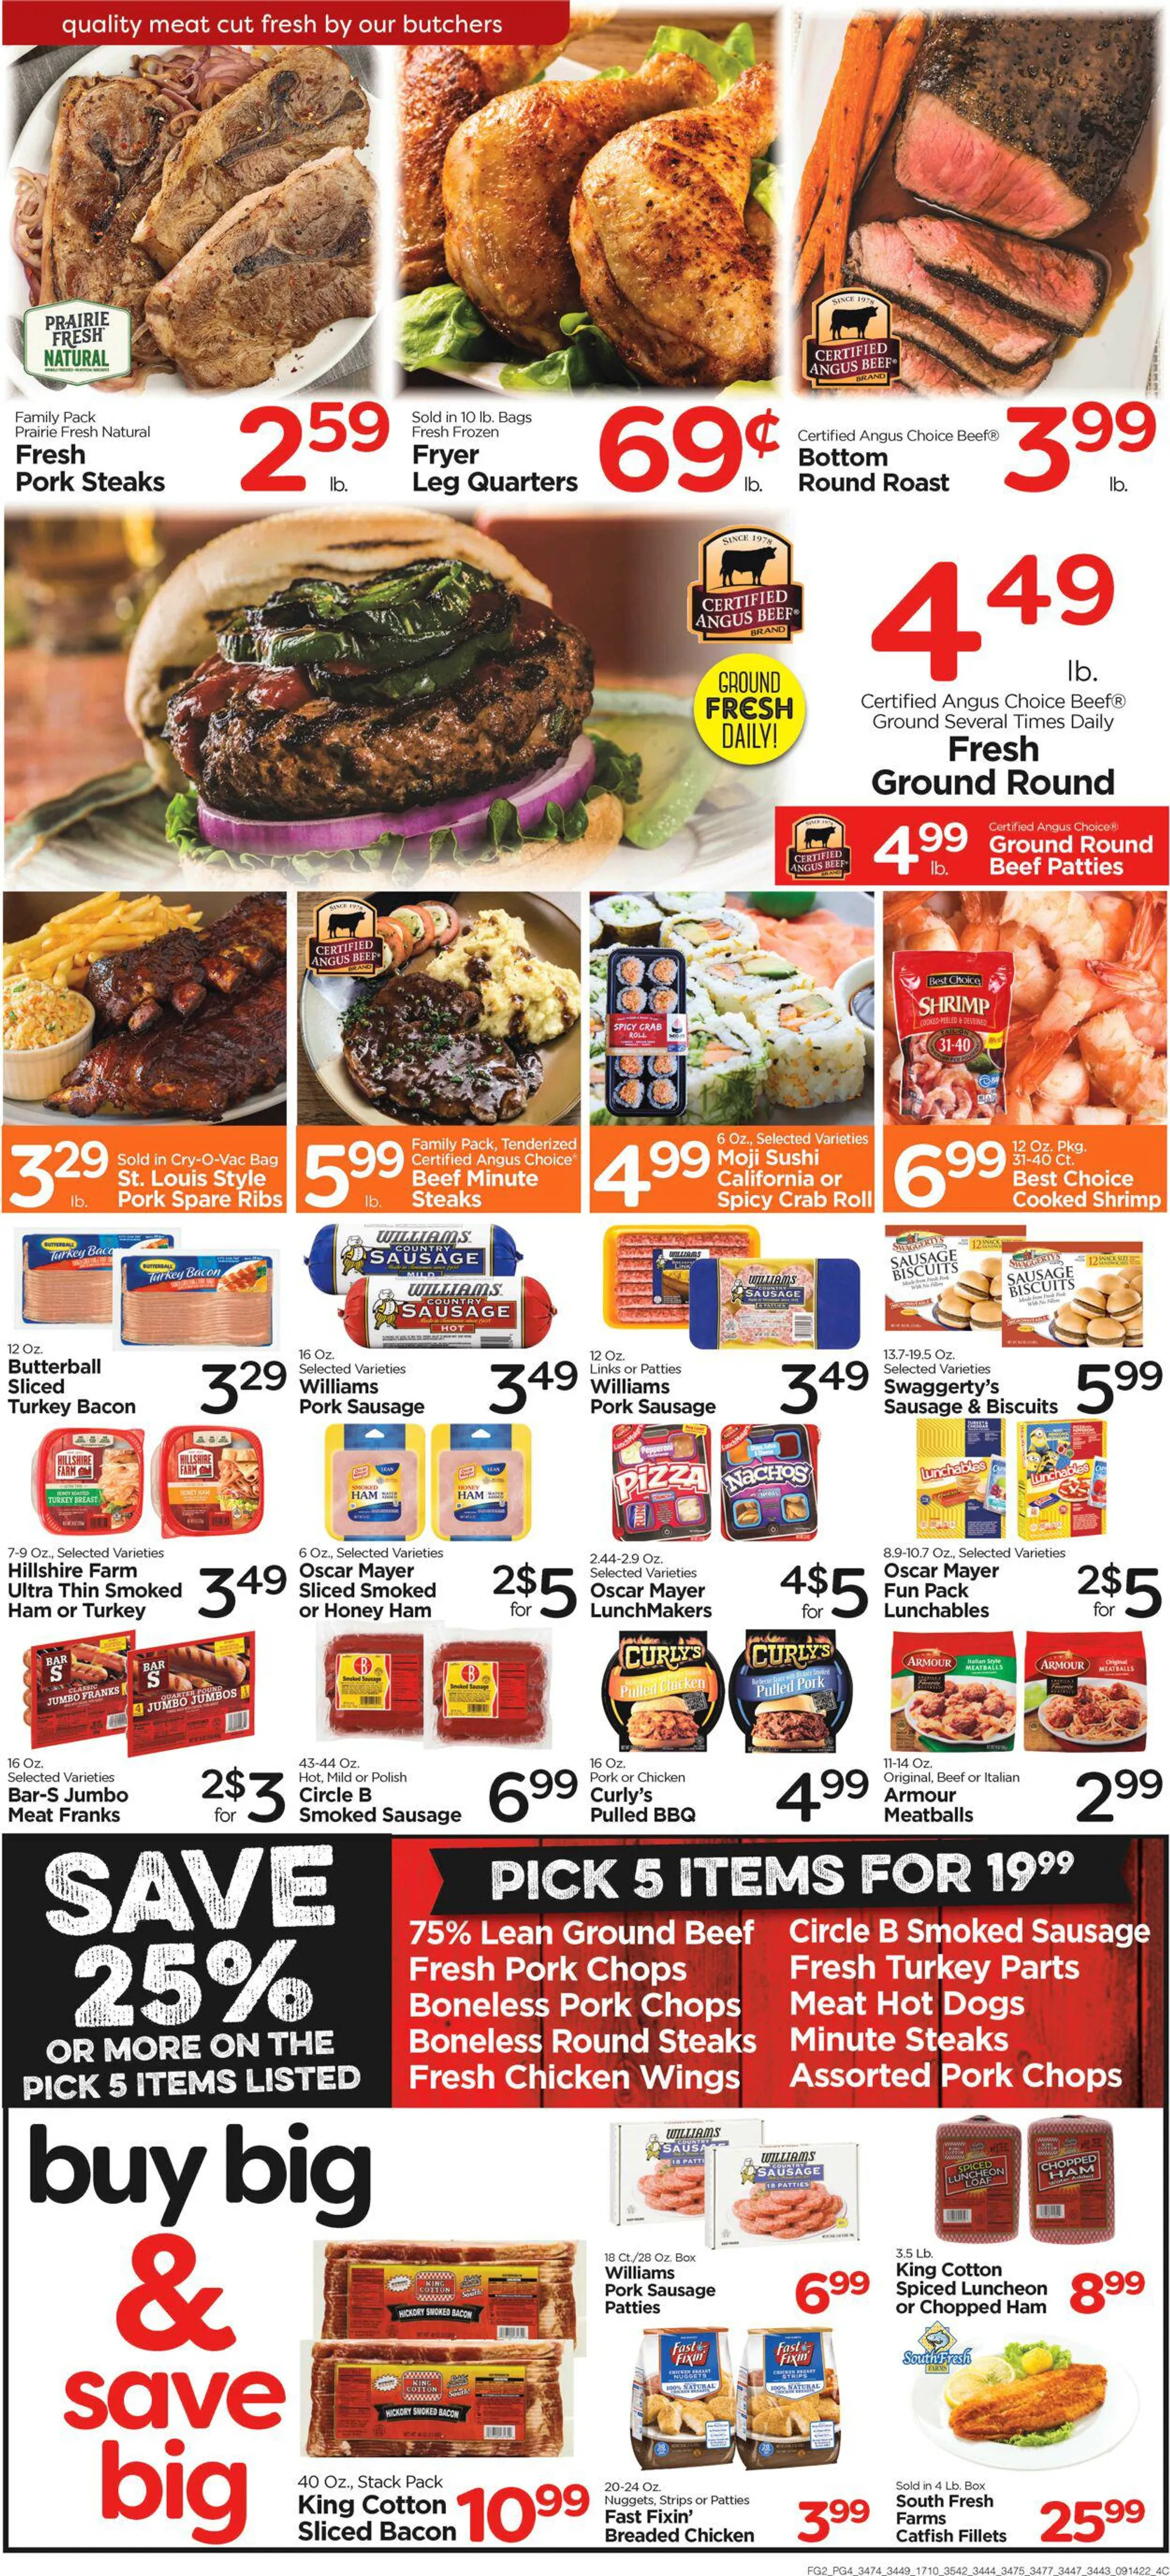 Edwards Food Giant Current weekly ad - 4